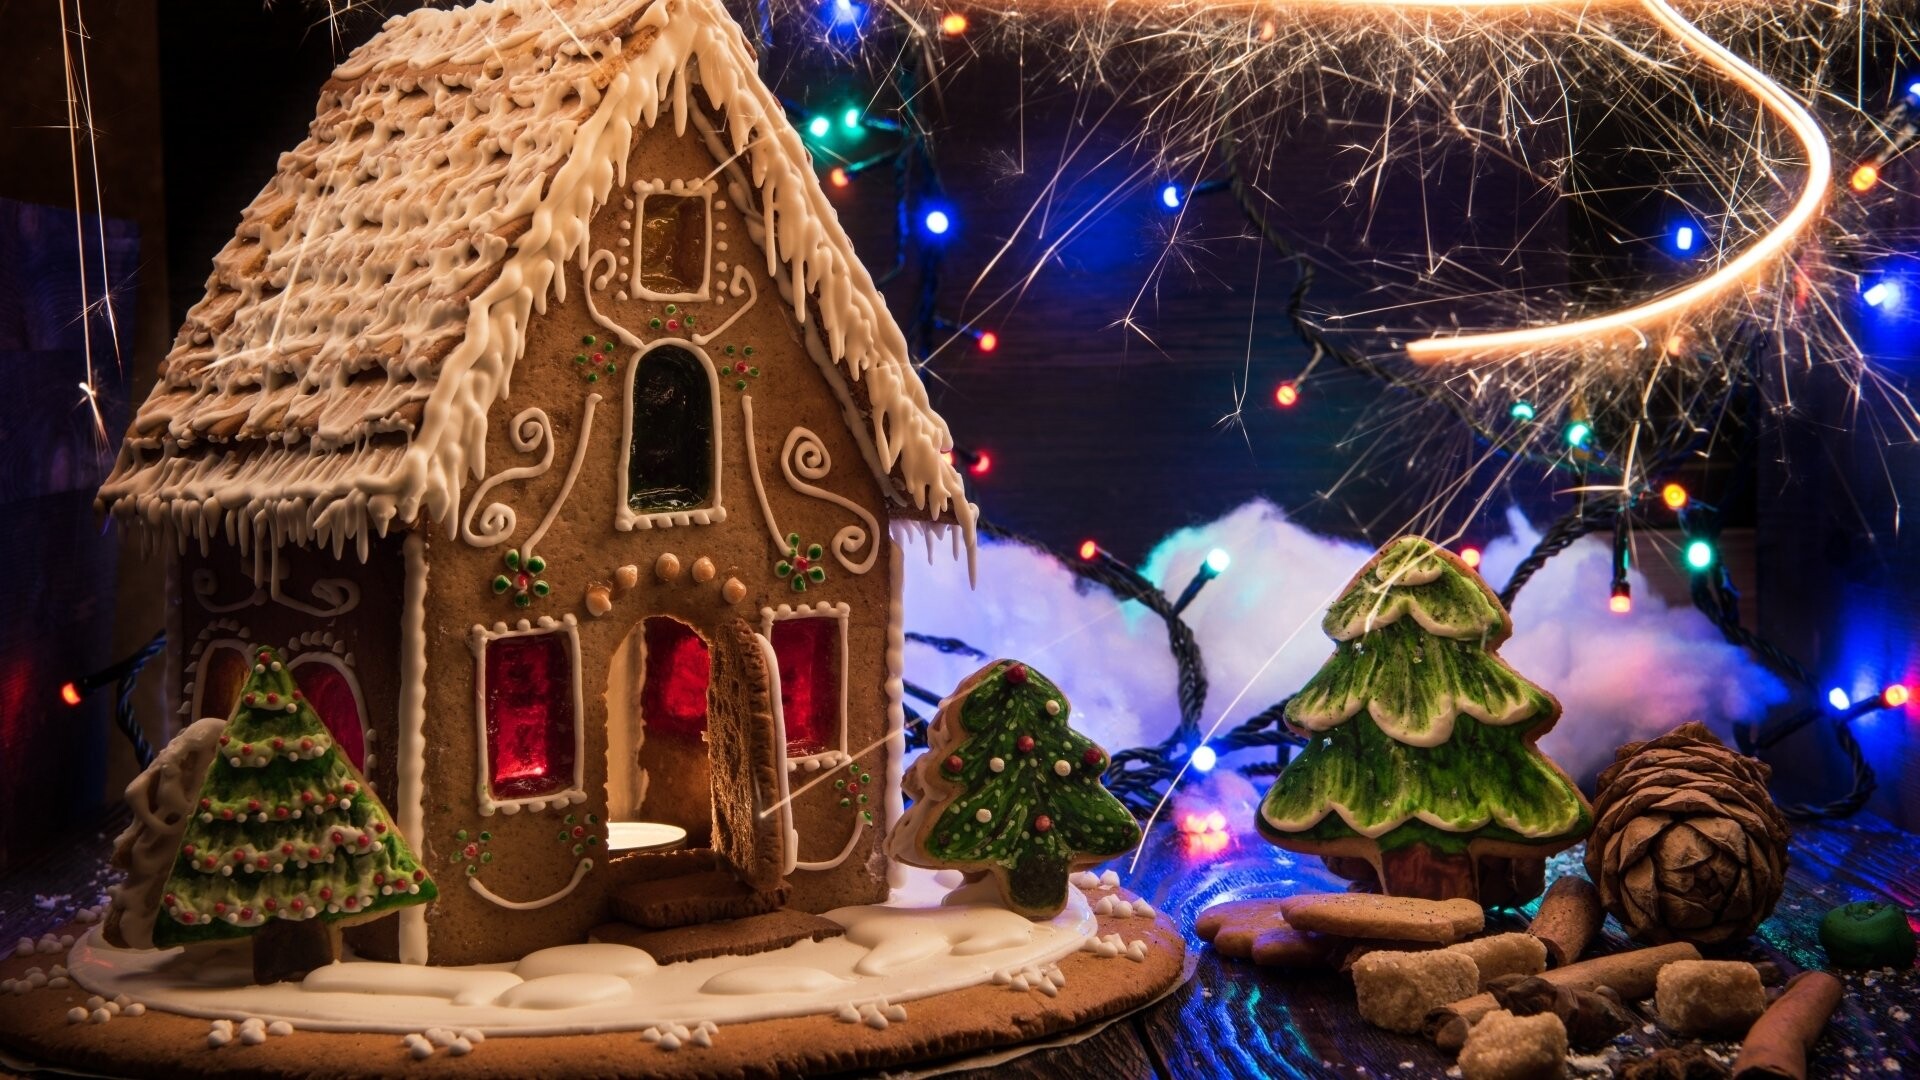 Gingerbread House: Christmas tree ornaments, Cookie house, Festive Christmas activities, Bakery. 1920x1080 Full HD Background.